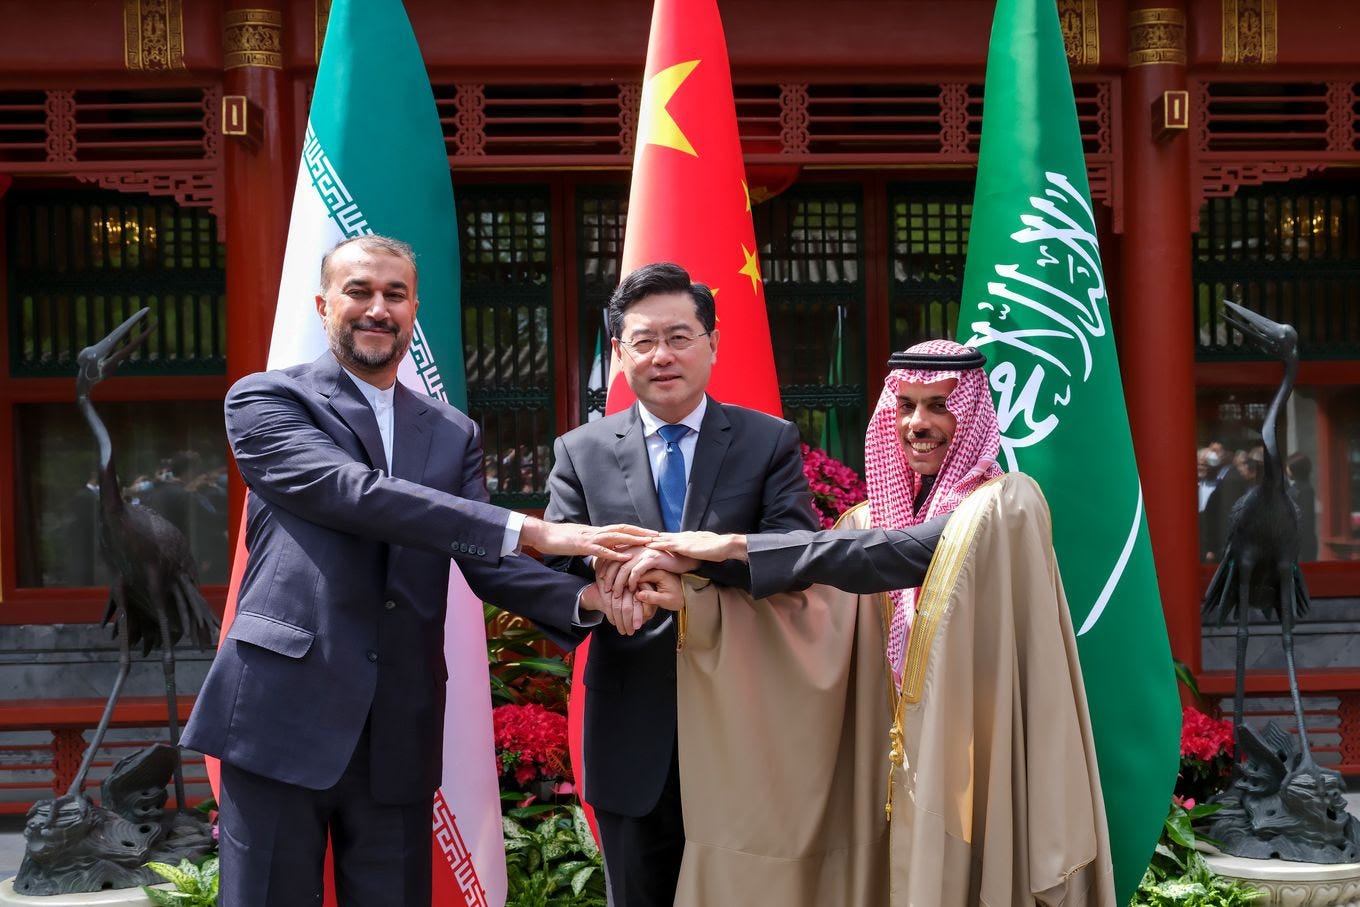 Iranian Foreign Minister Hossein Amirabdollahian holds hands with his Saudi Arabian counterpart, Prince Faisal bin Farhan al-Saud, and Chinese counterpart, Qin Gang, in Beijing on Thursday. (Ding Lin/Xinhua News Agency/AP/AP)